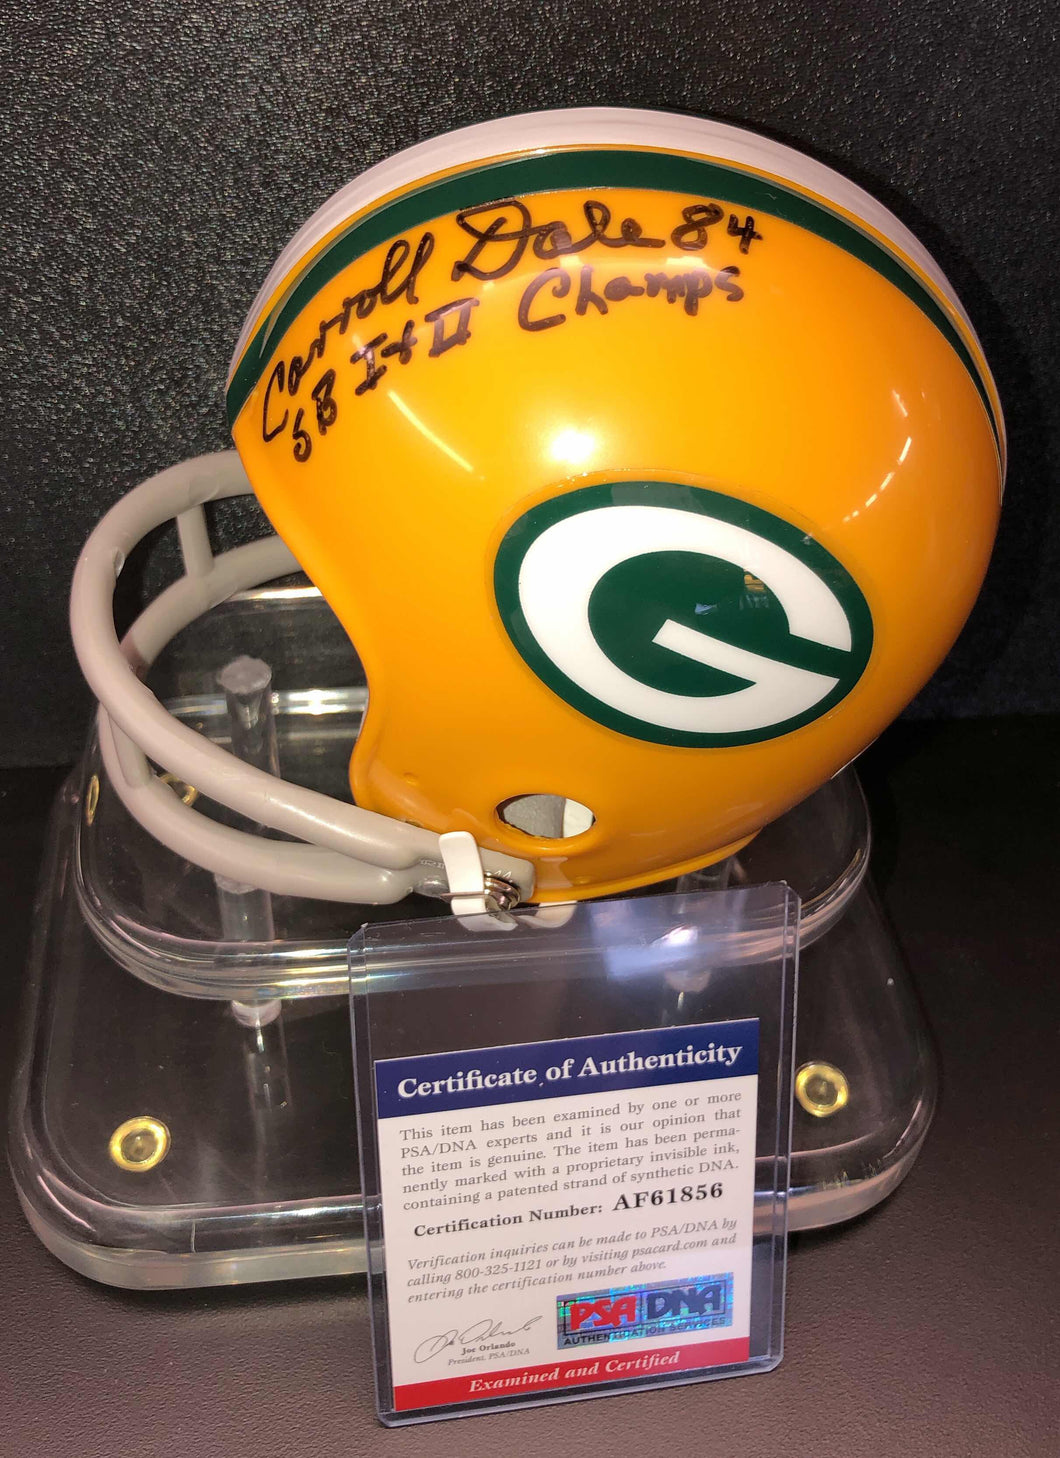 Carroll Dale Signed Green Bay Packers Mini Helmet PSA/DNA Authentication Services Certified